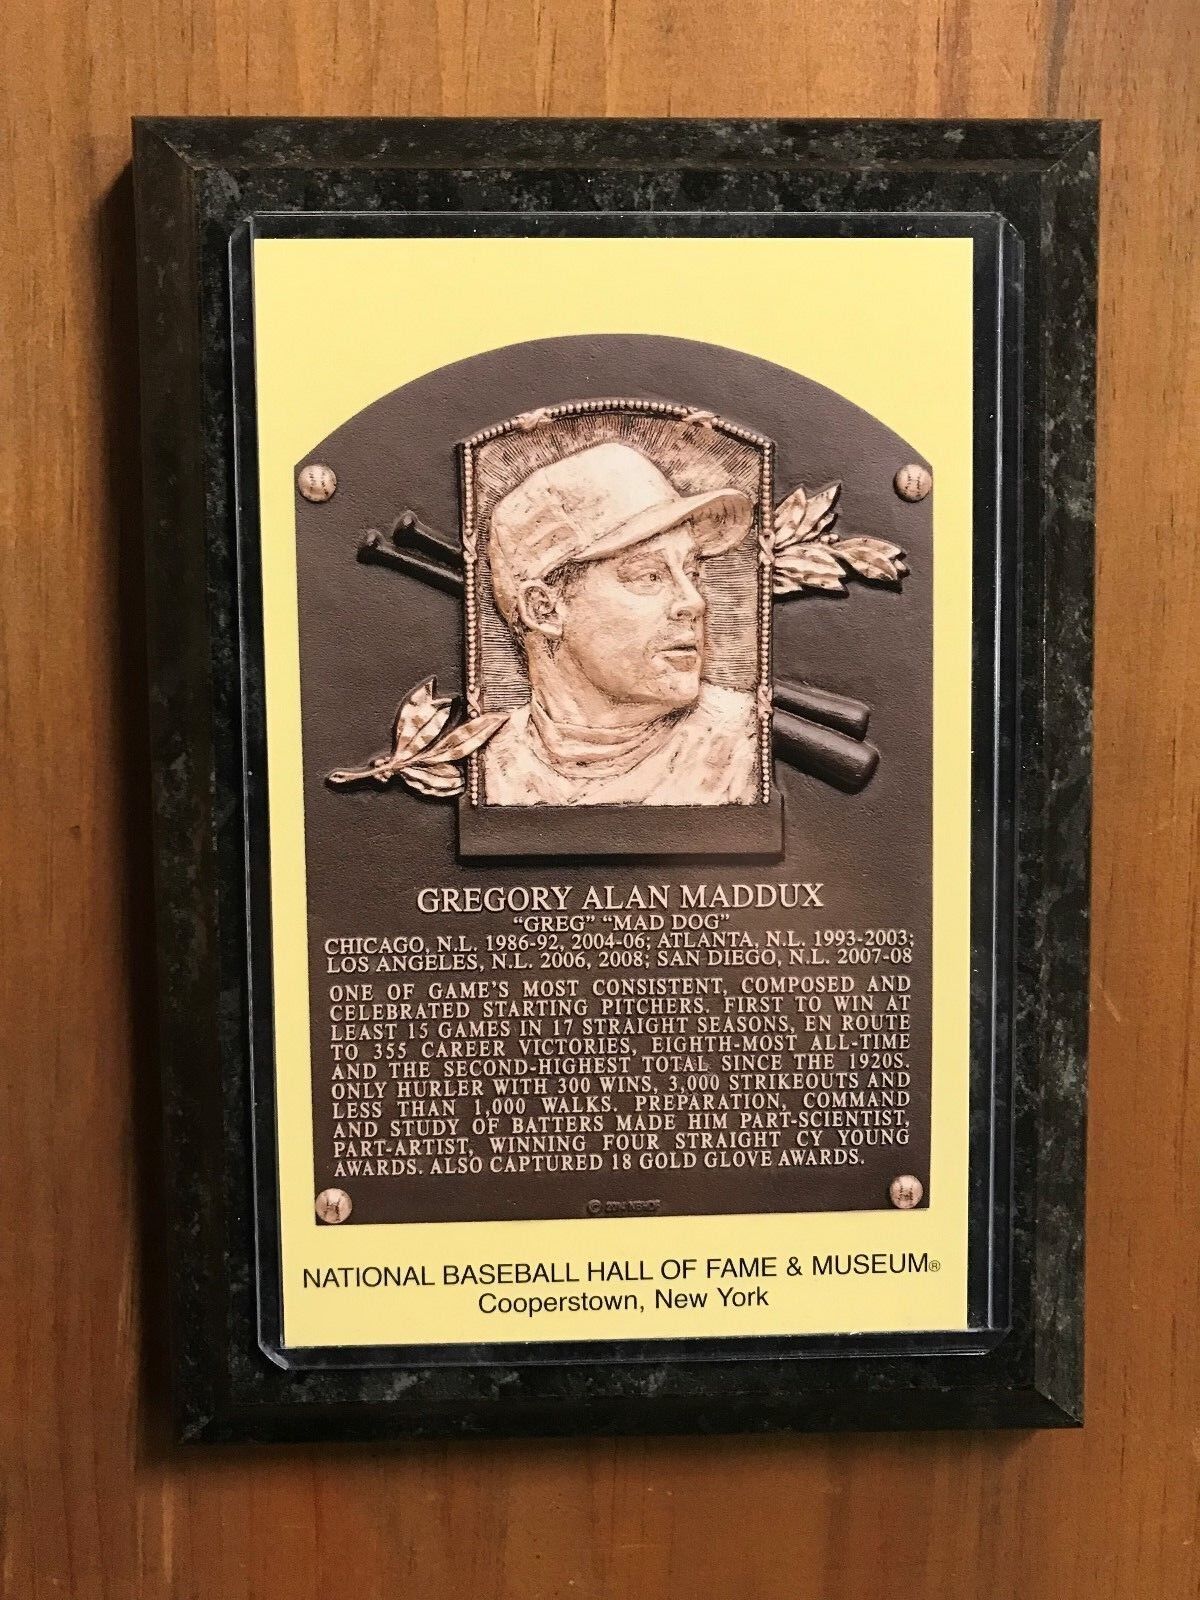 Greg Maddux - Baseball Hall of Fame Induction - Ready to Hang Wall Plaque